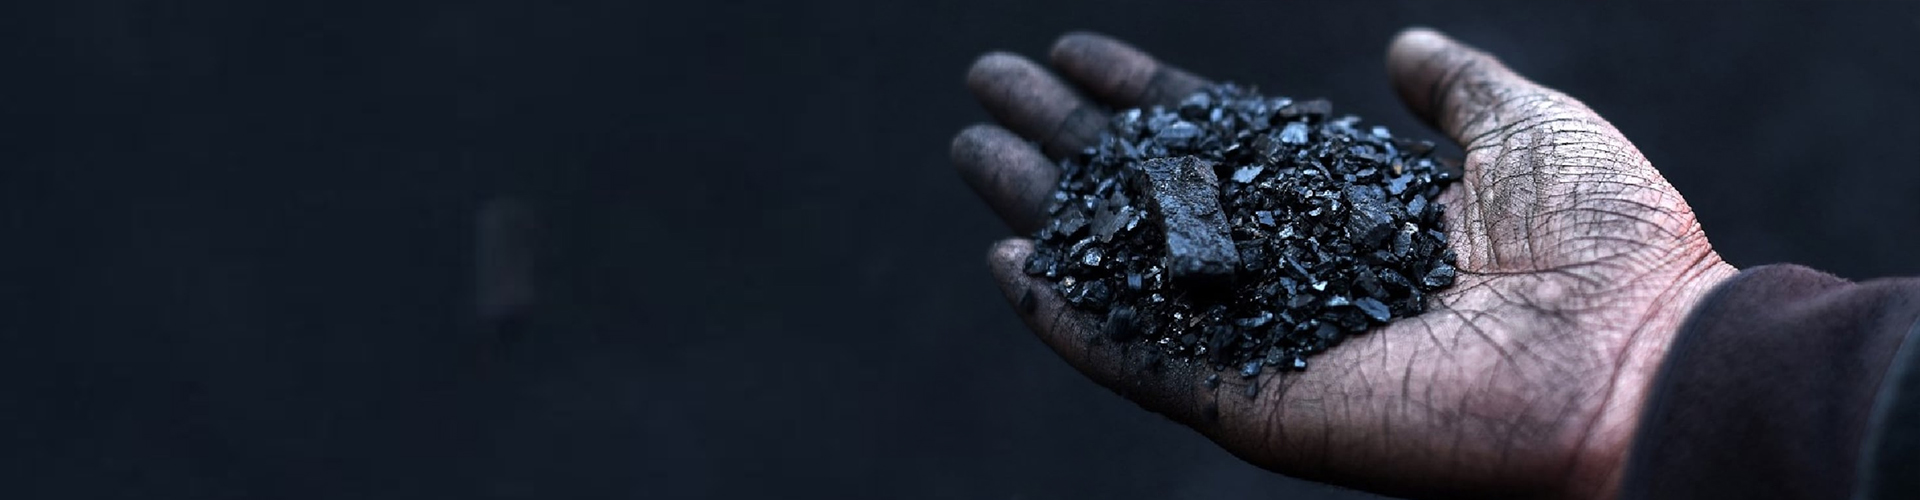 Are We Currently Living In The Era Of Coal Or Alternatives?